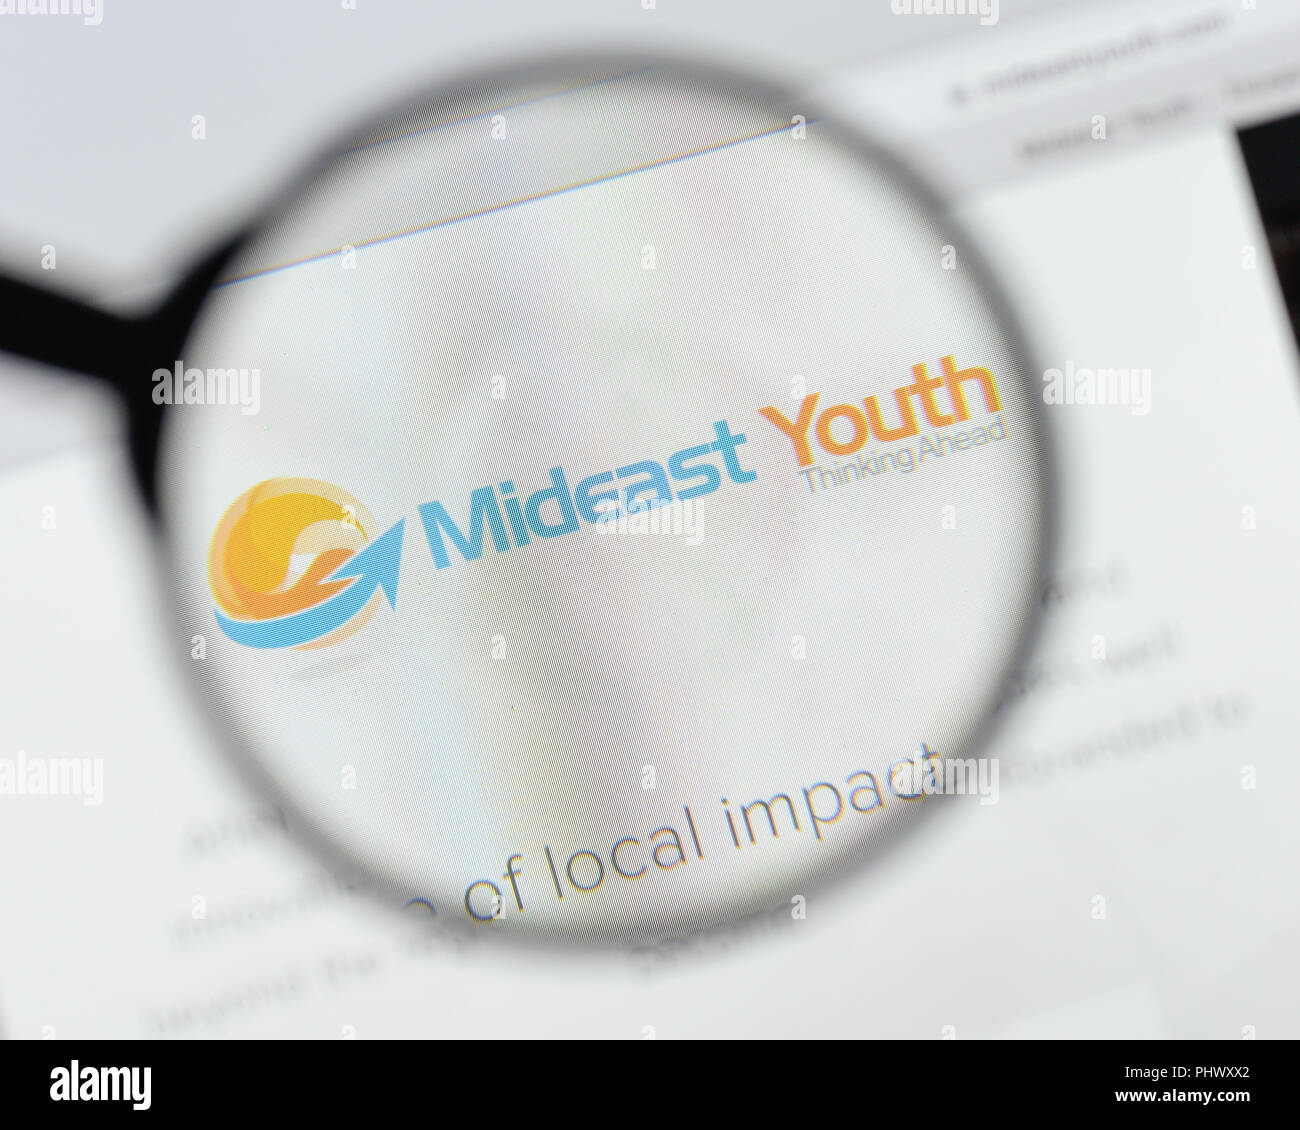 Milan, Italy - August 20, 2018: Mideast Youth website homepage. Mideast Youth logo visible. Stock Photo